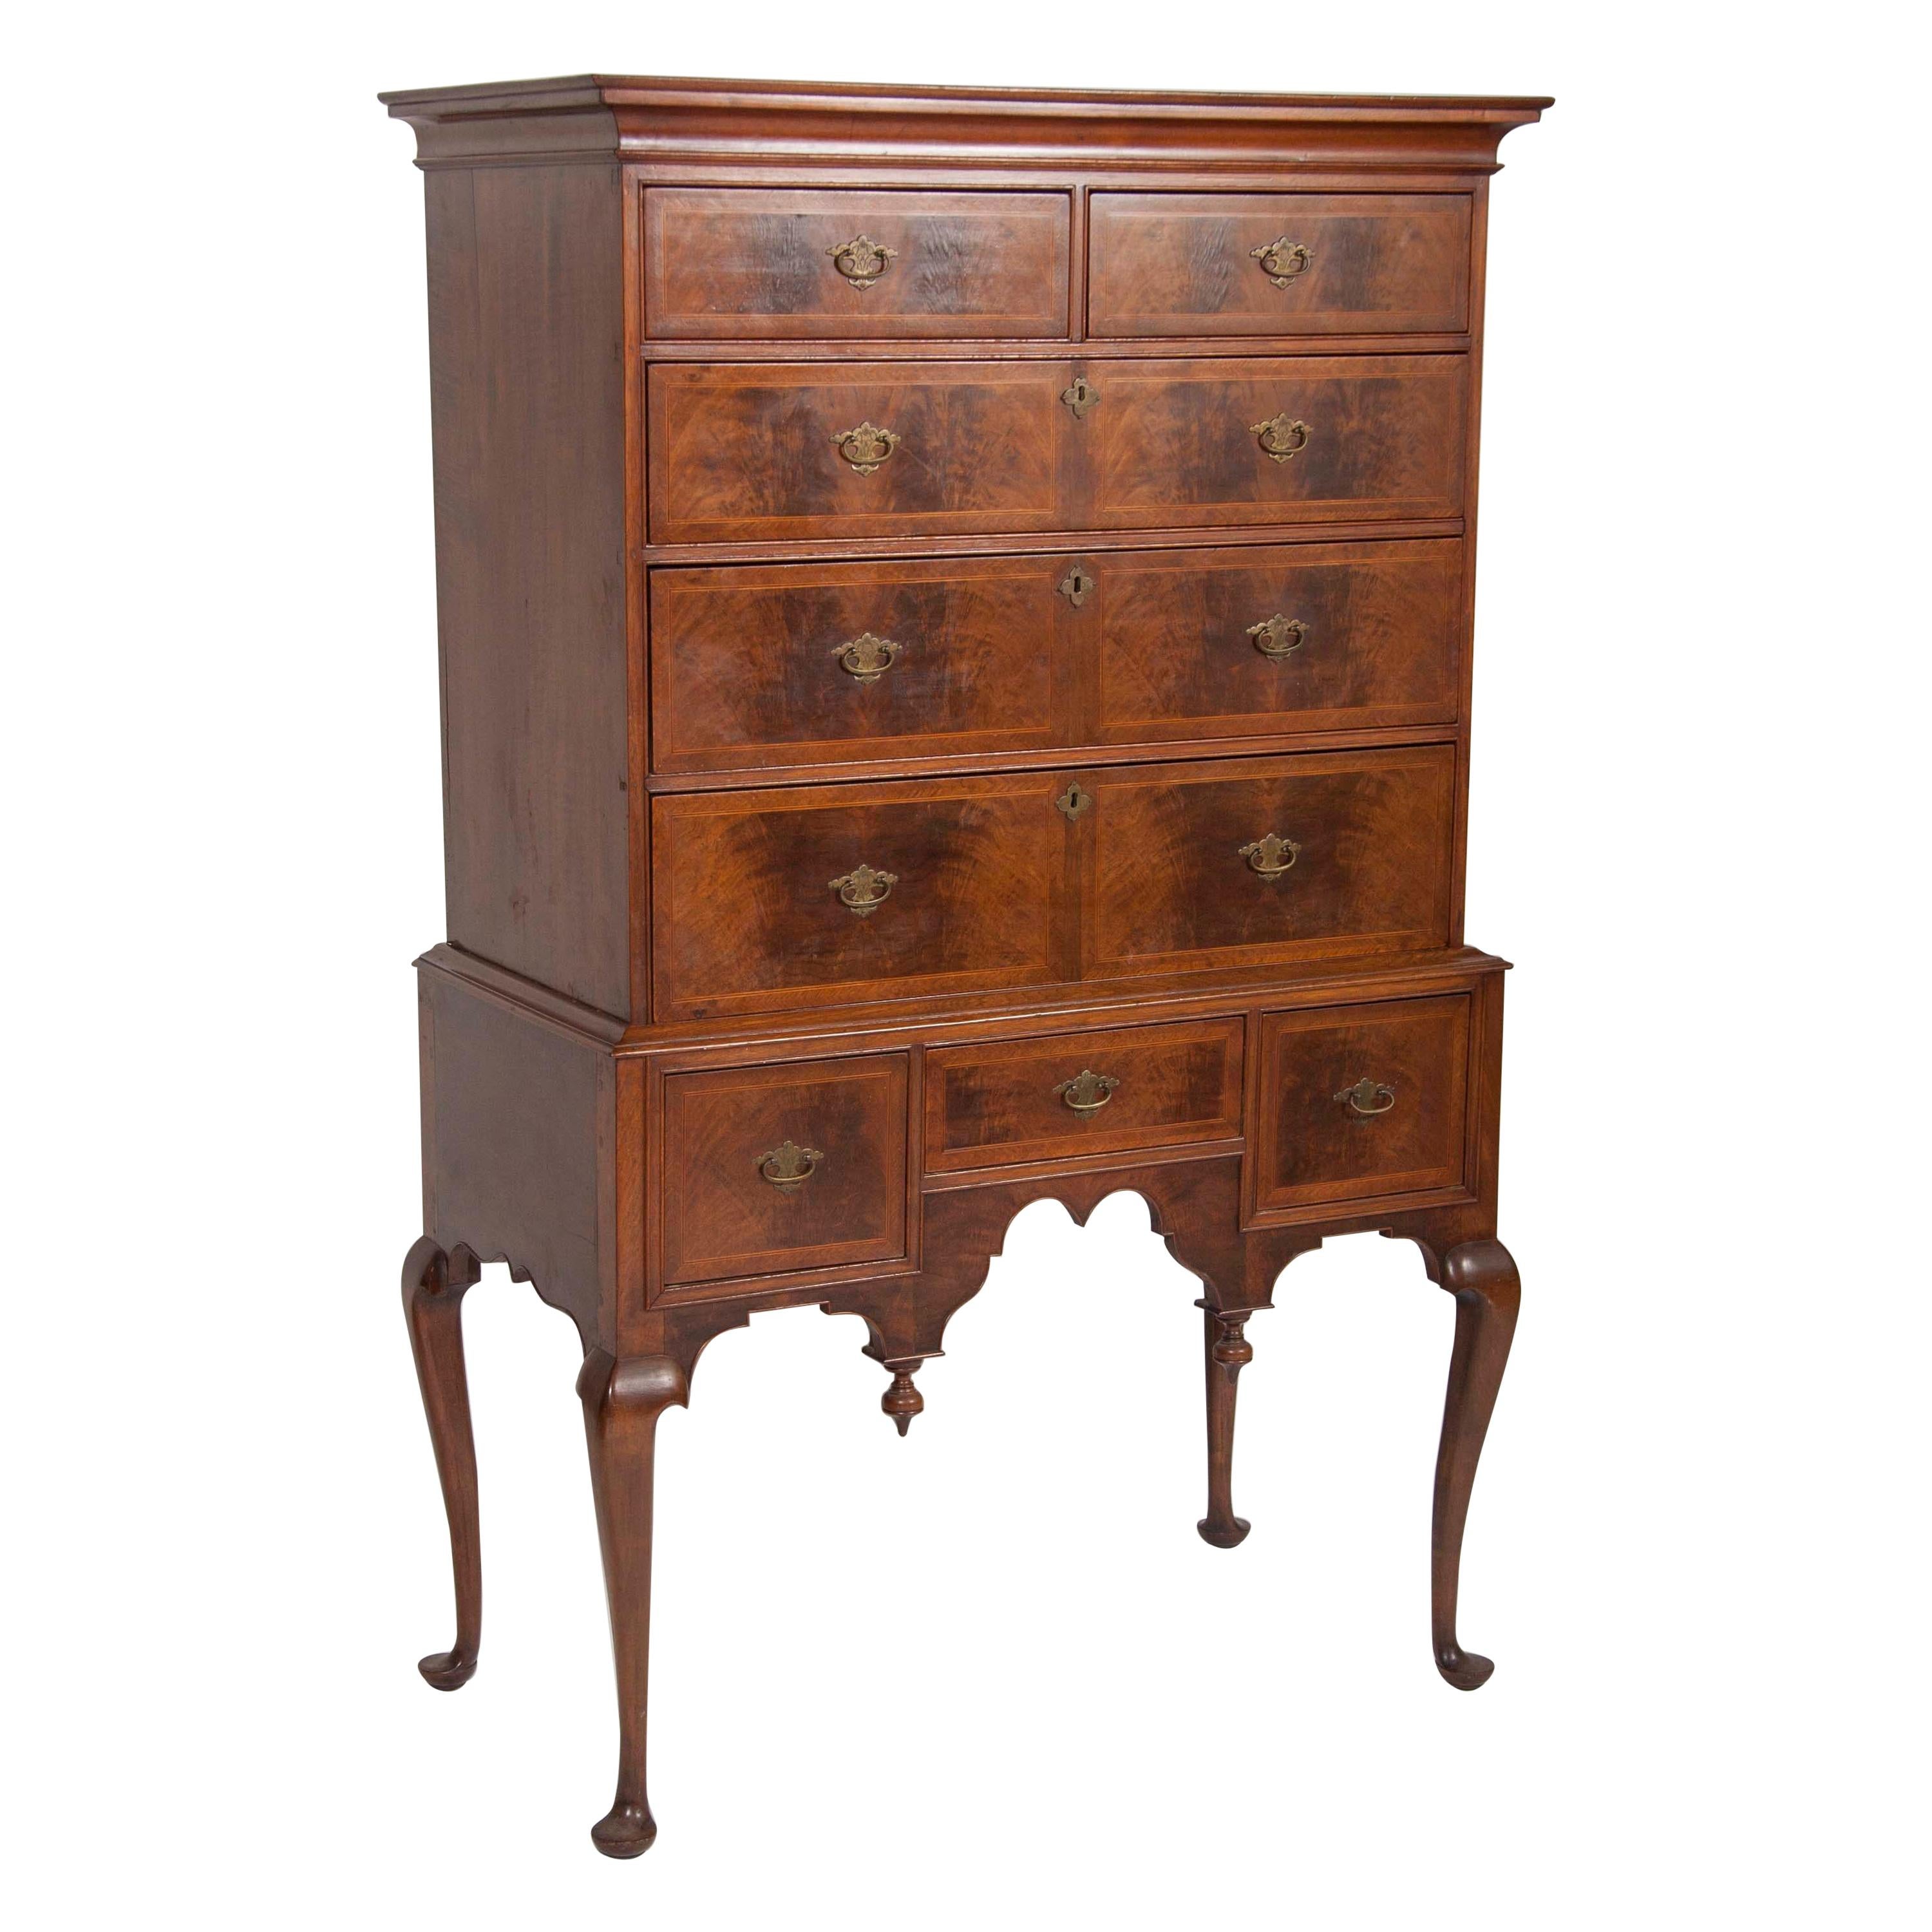 Desirable New England Diminutive Two Part Highboy For Sale